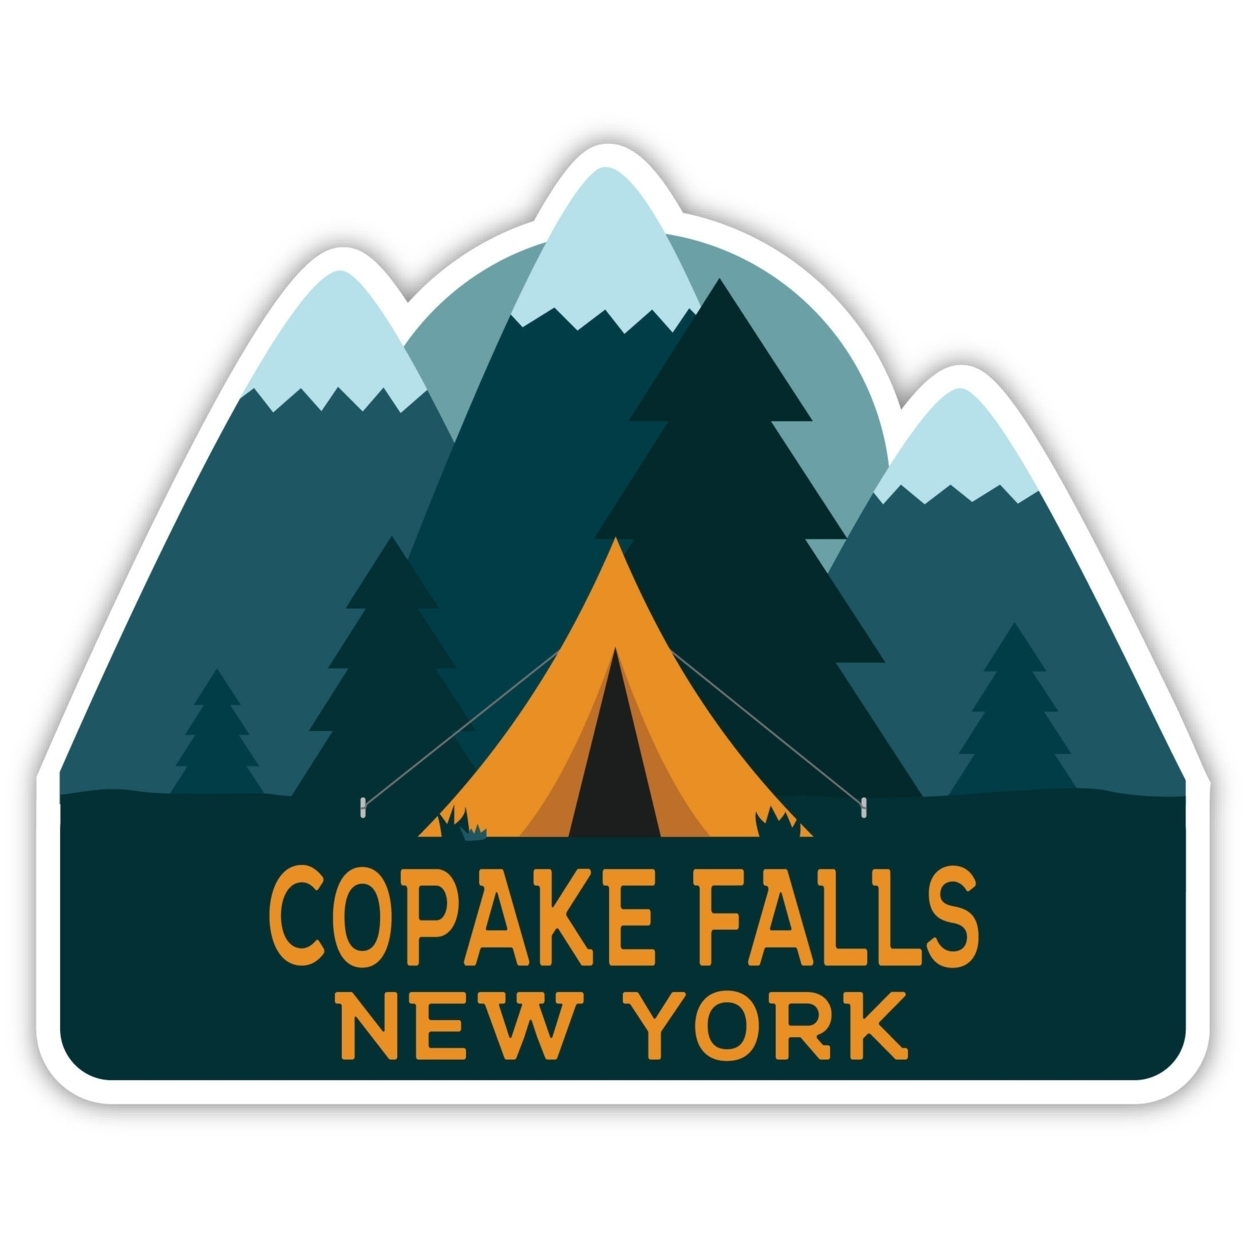 Copake Falls New York Souvenir Decorative Stickers (Choose Theme And Size) - 4-Pack, 2-Inch, Tent